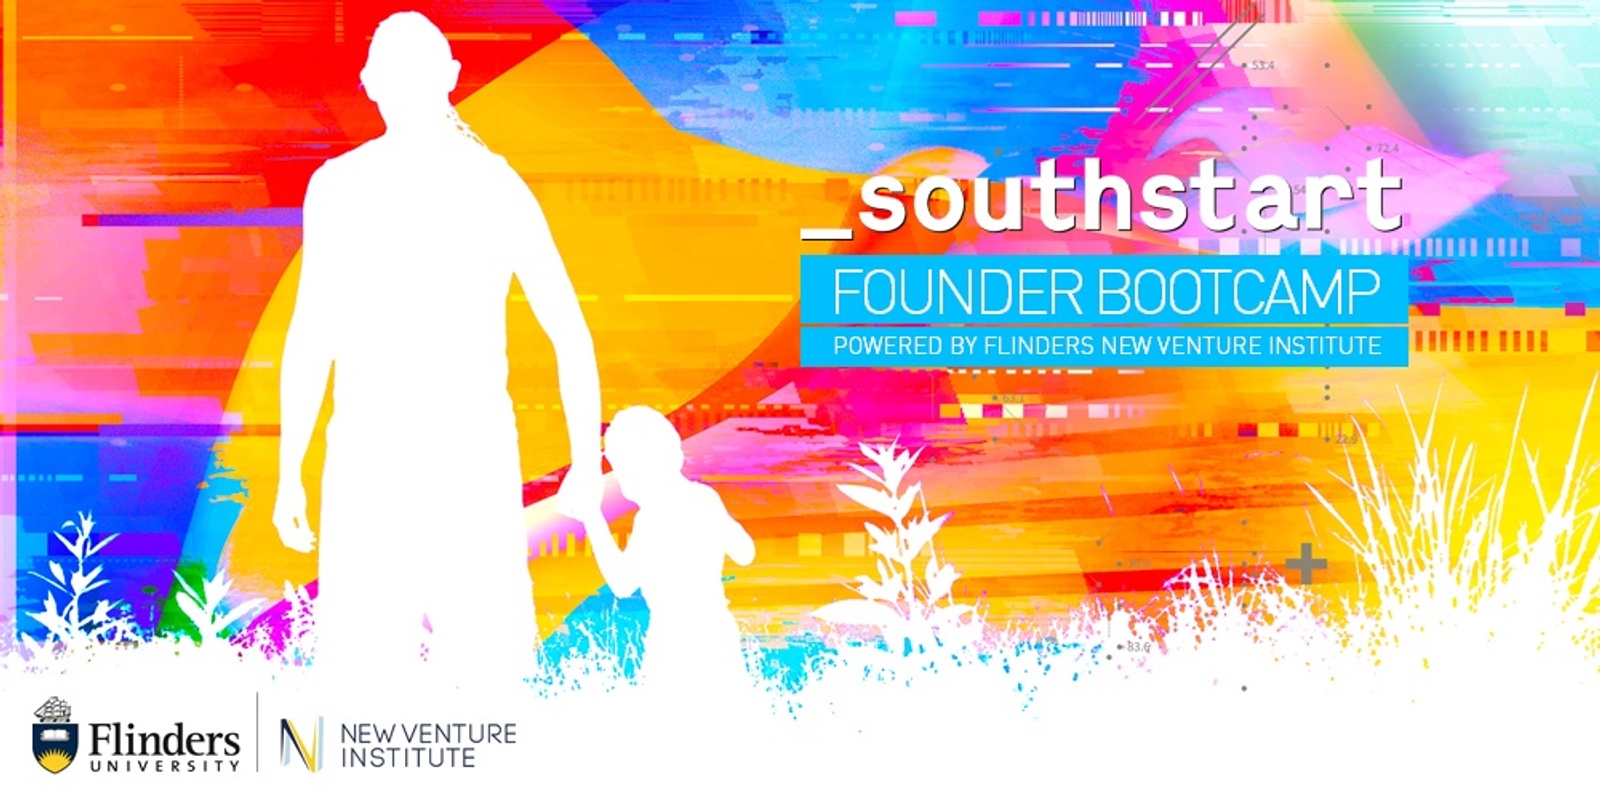 Banner image for _southstart [Founder Bootcamp] powered by Flinders New Venture Institute